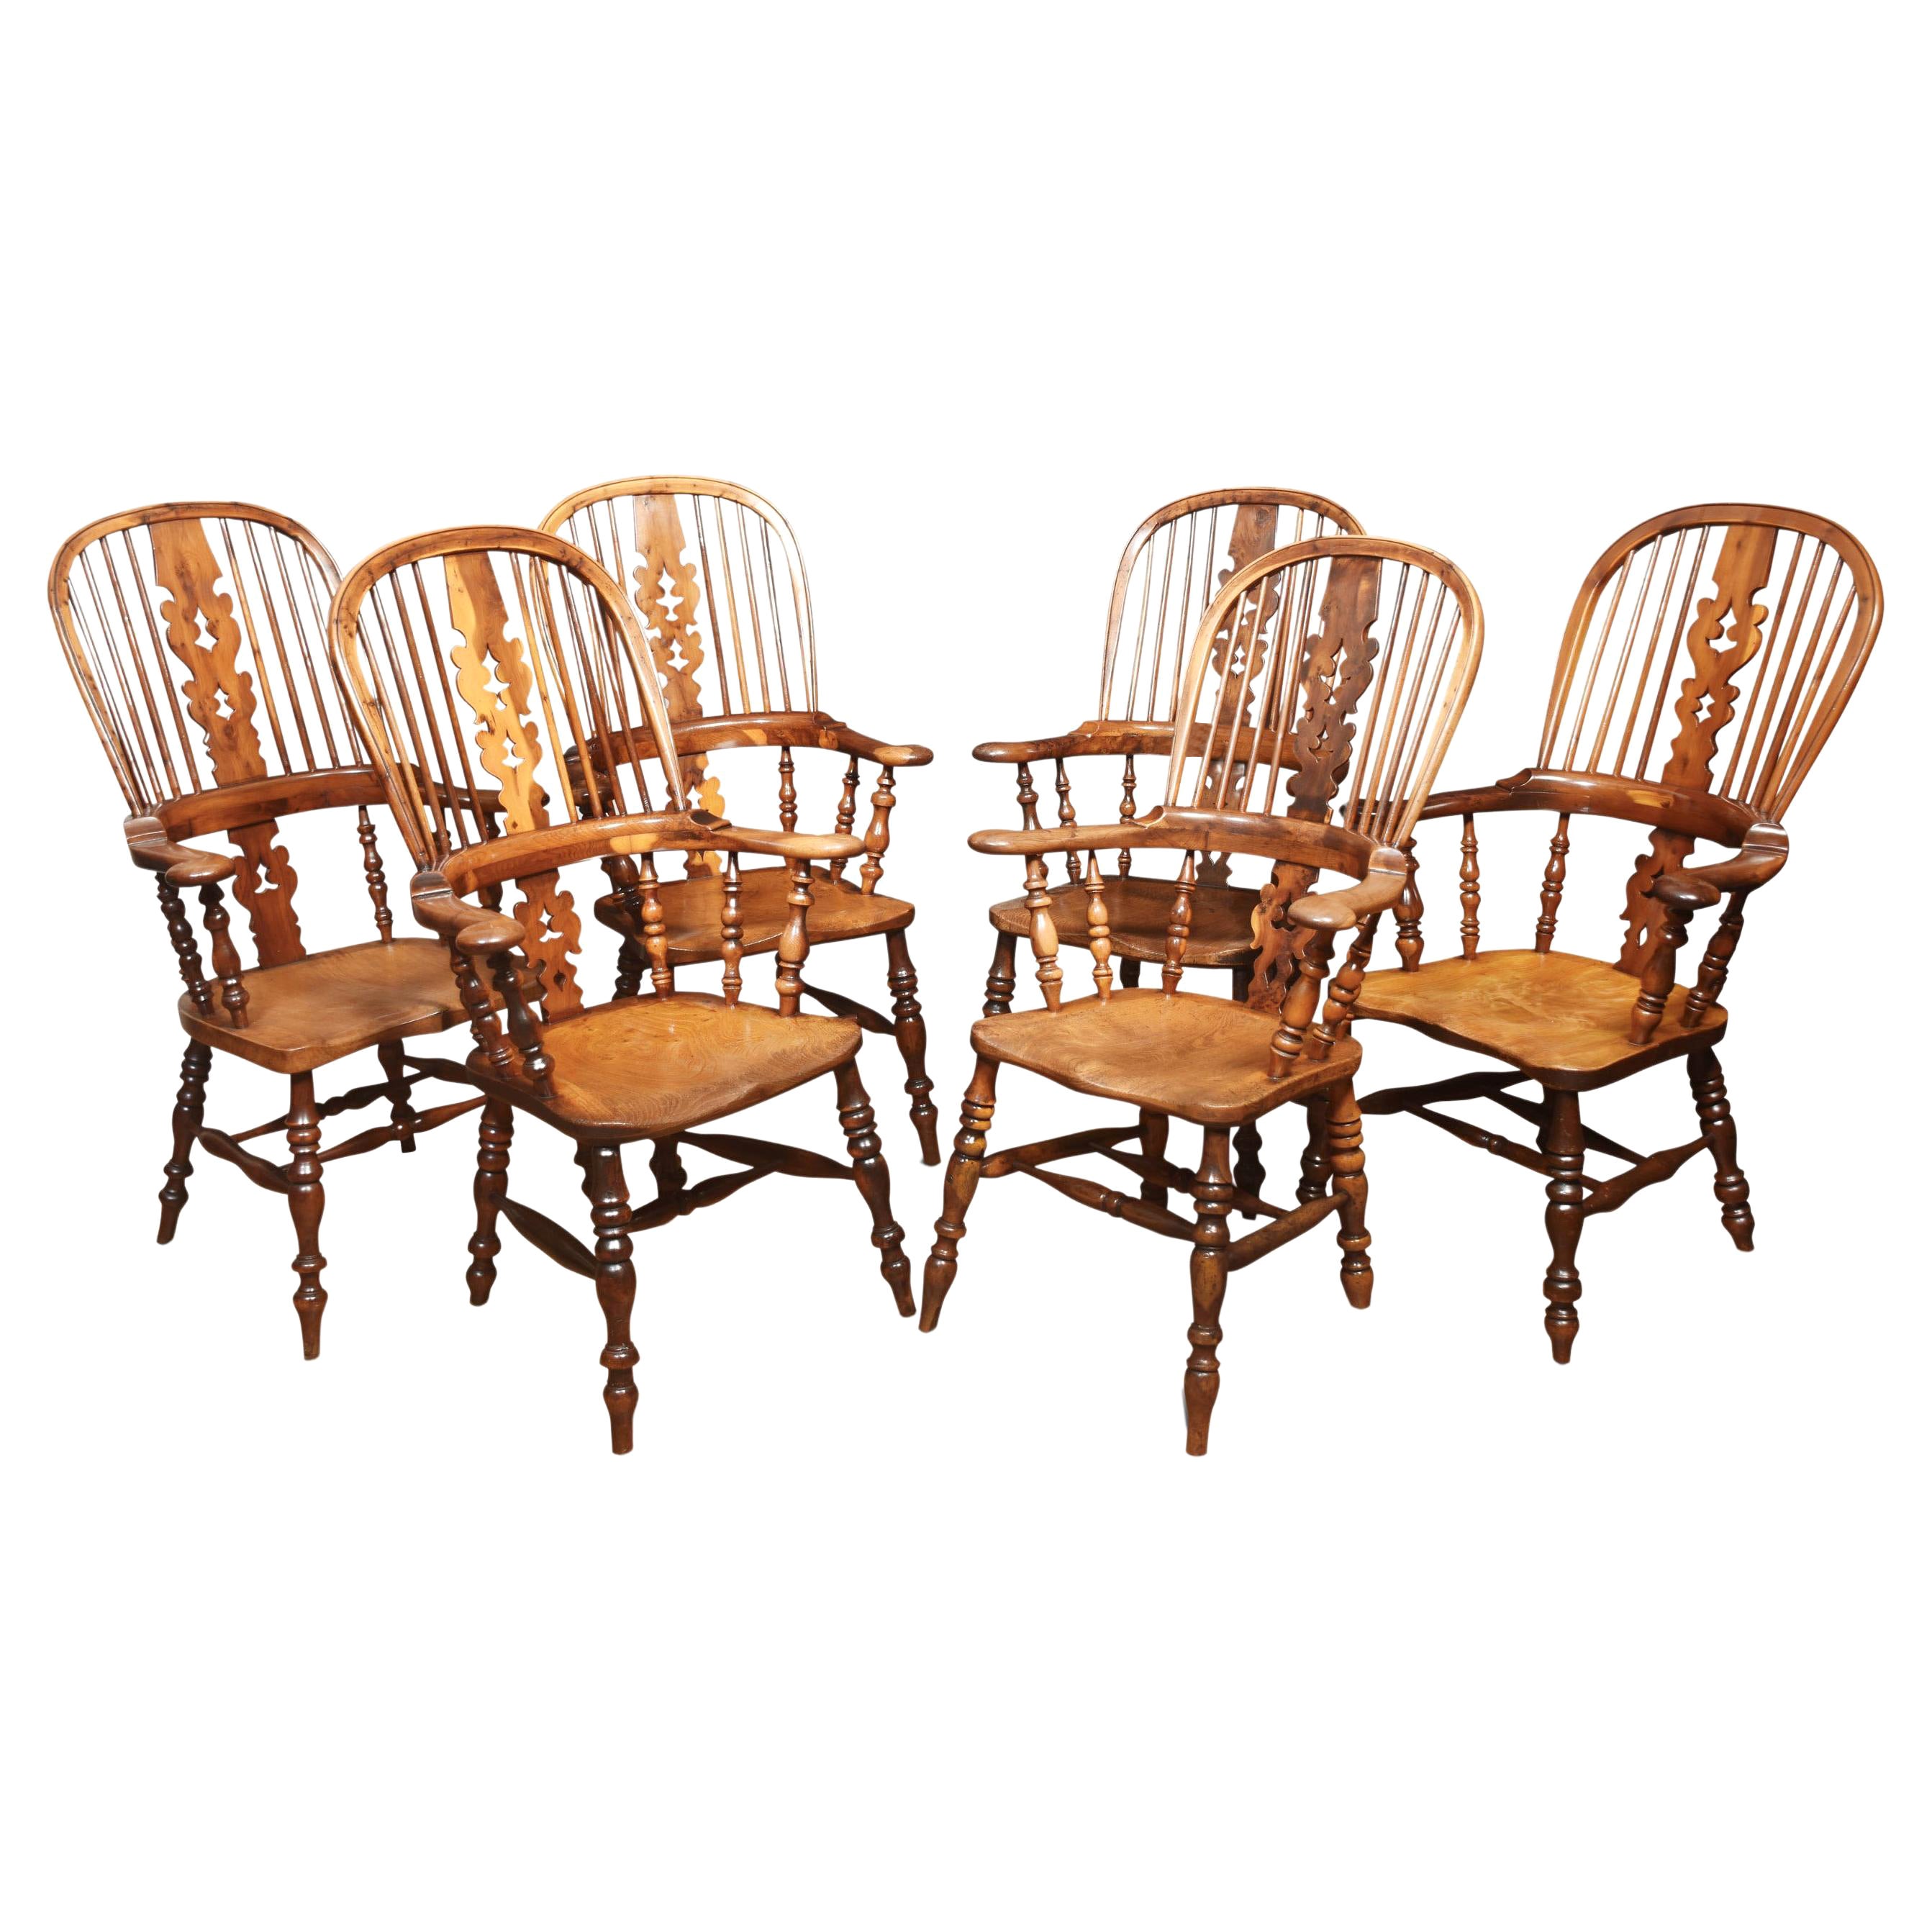 Matched Set of Six 19th Century Yew Wood Windsor Armchairs For Sale